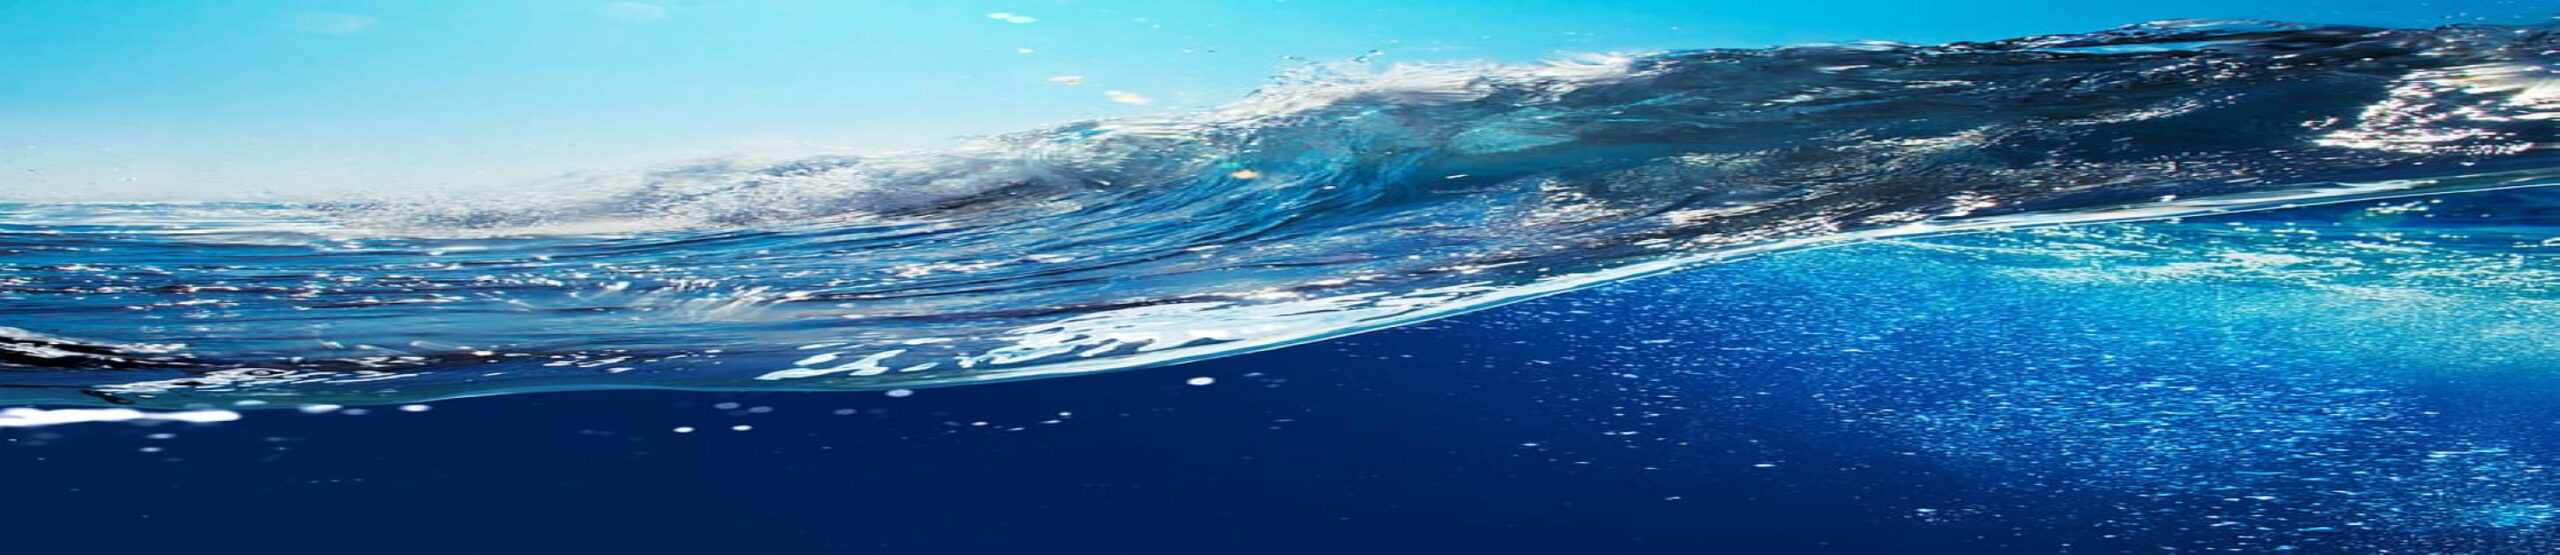 sea-water-waves-blue-wallpaper-preview